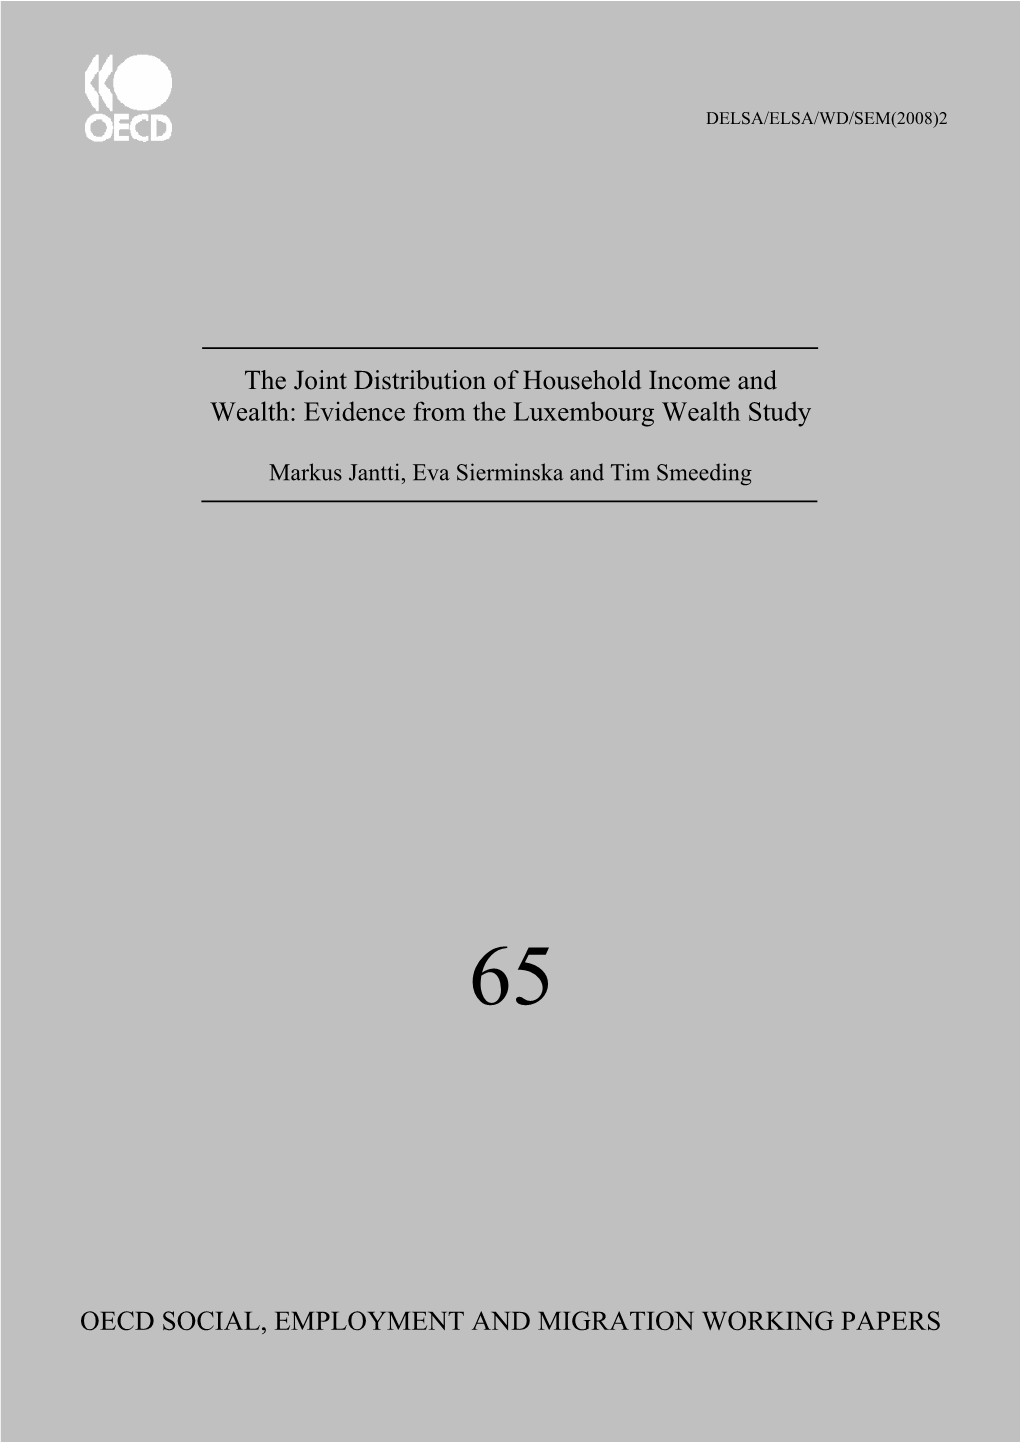 The Joint Distribution of Household Income and Wealth: Evidence from the Luxembourg Wealth Study